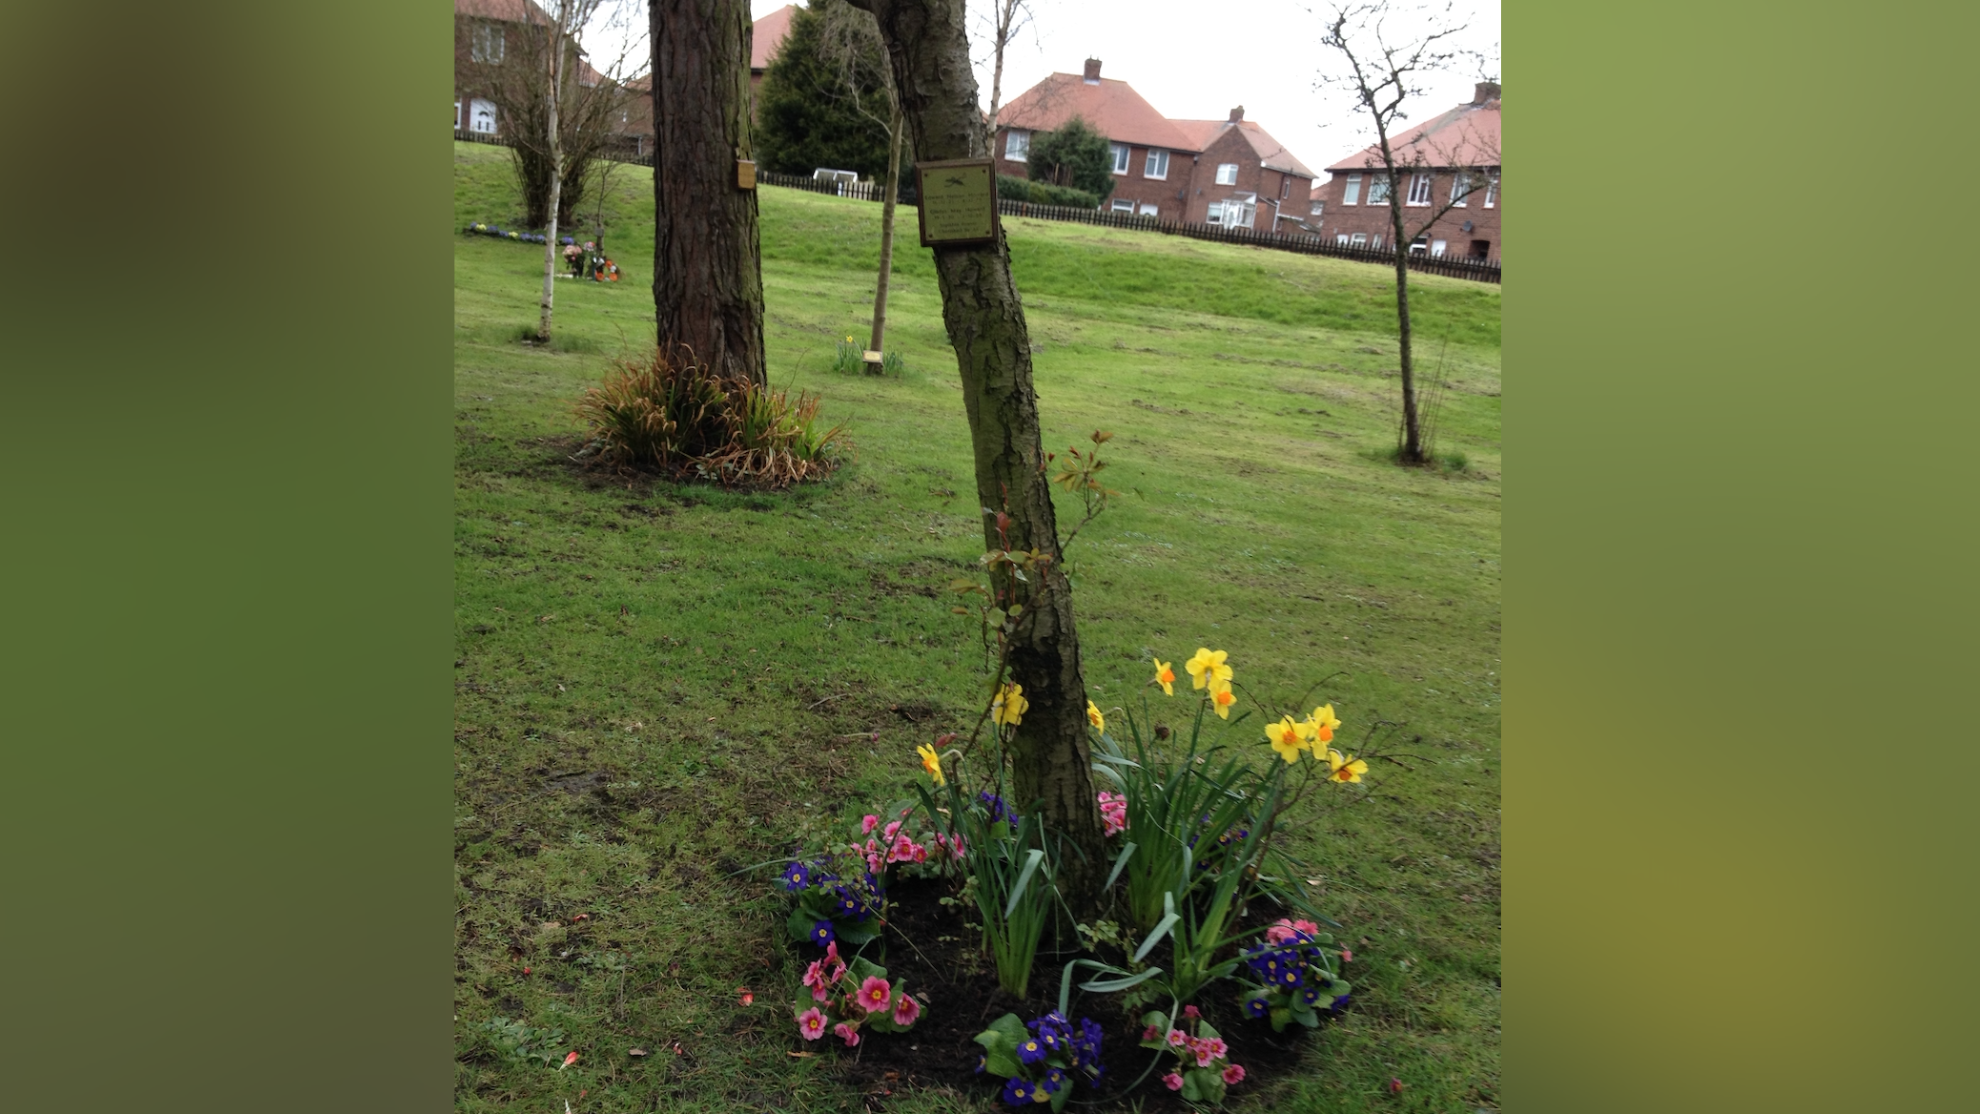 family 'devastated' after council fells memorial tree